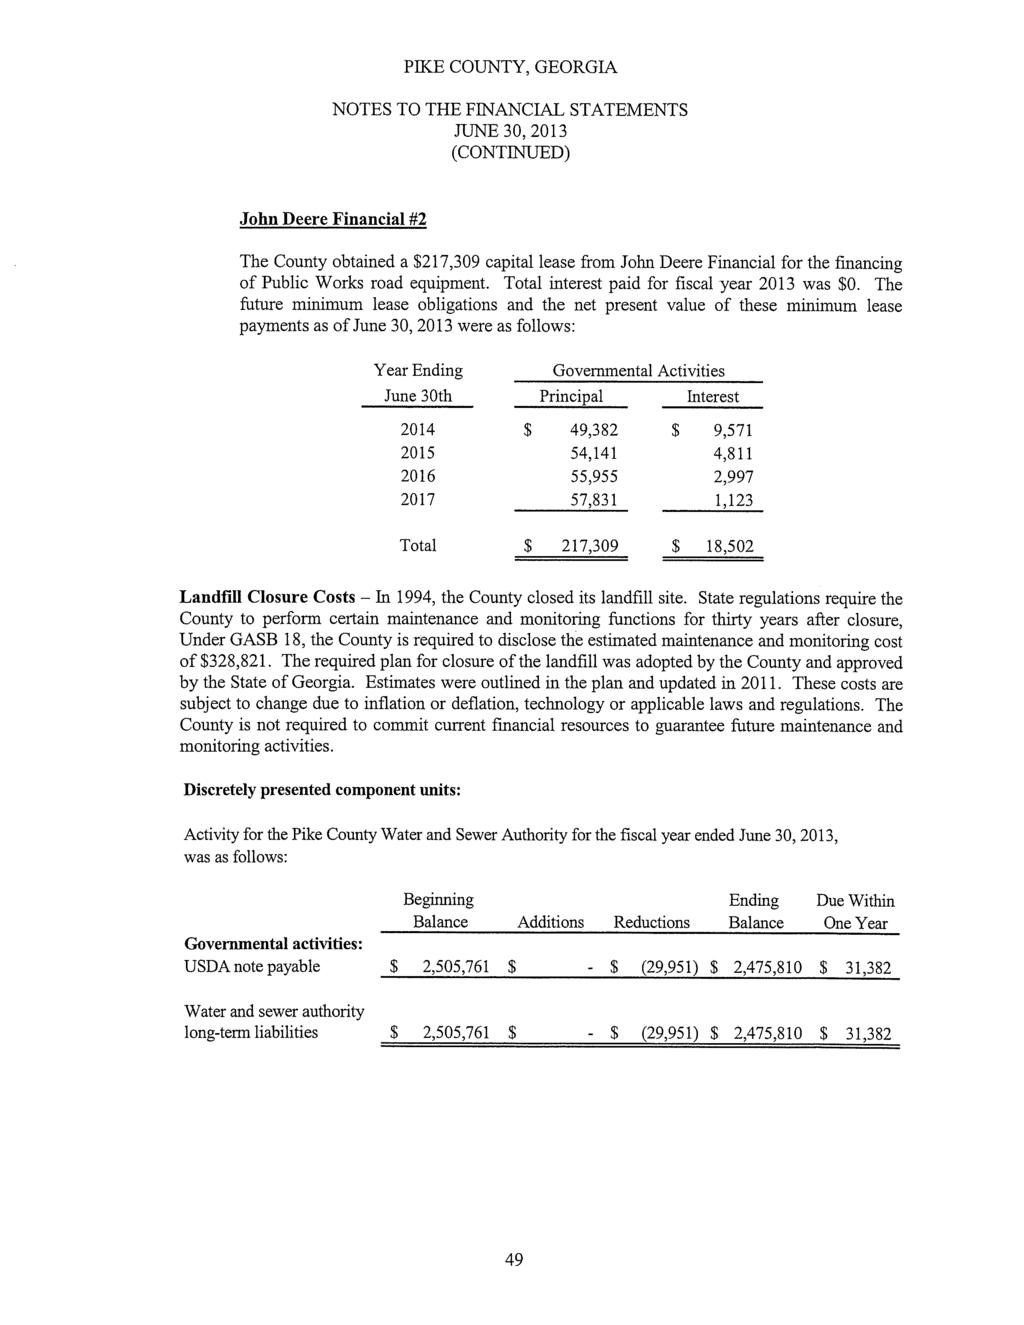 NOTES TO THE FINANCIAL STATEMENTS JUNE 30, 2013 (CONTINUED) John Deere Financial #2 The County obtained a $217,309 capital lease from John Deere Financial for the fmancing of Public Works road